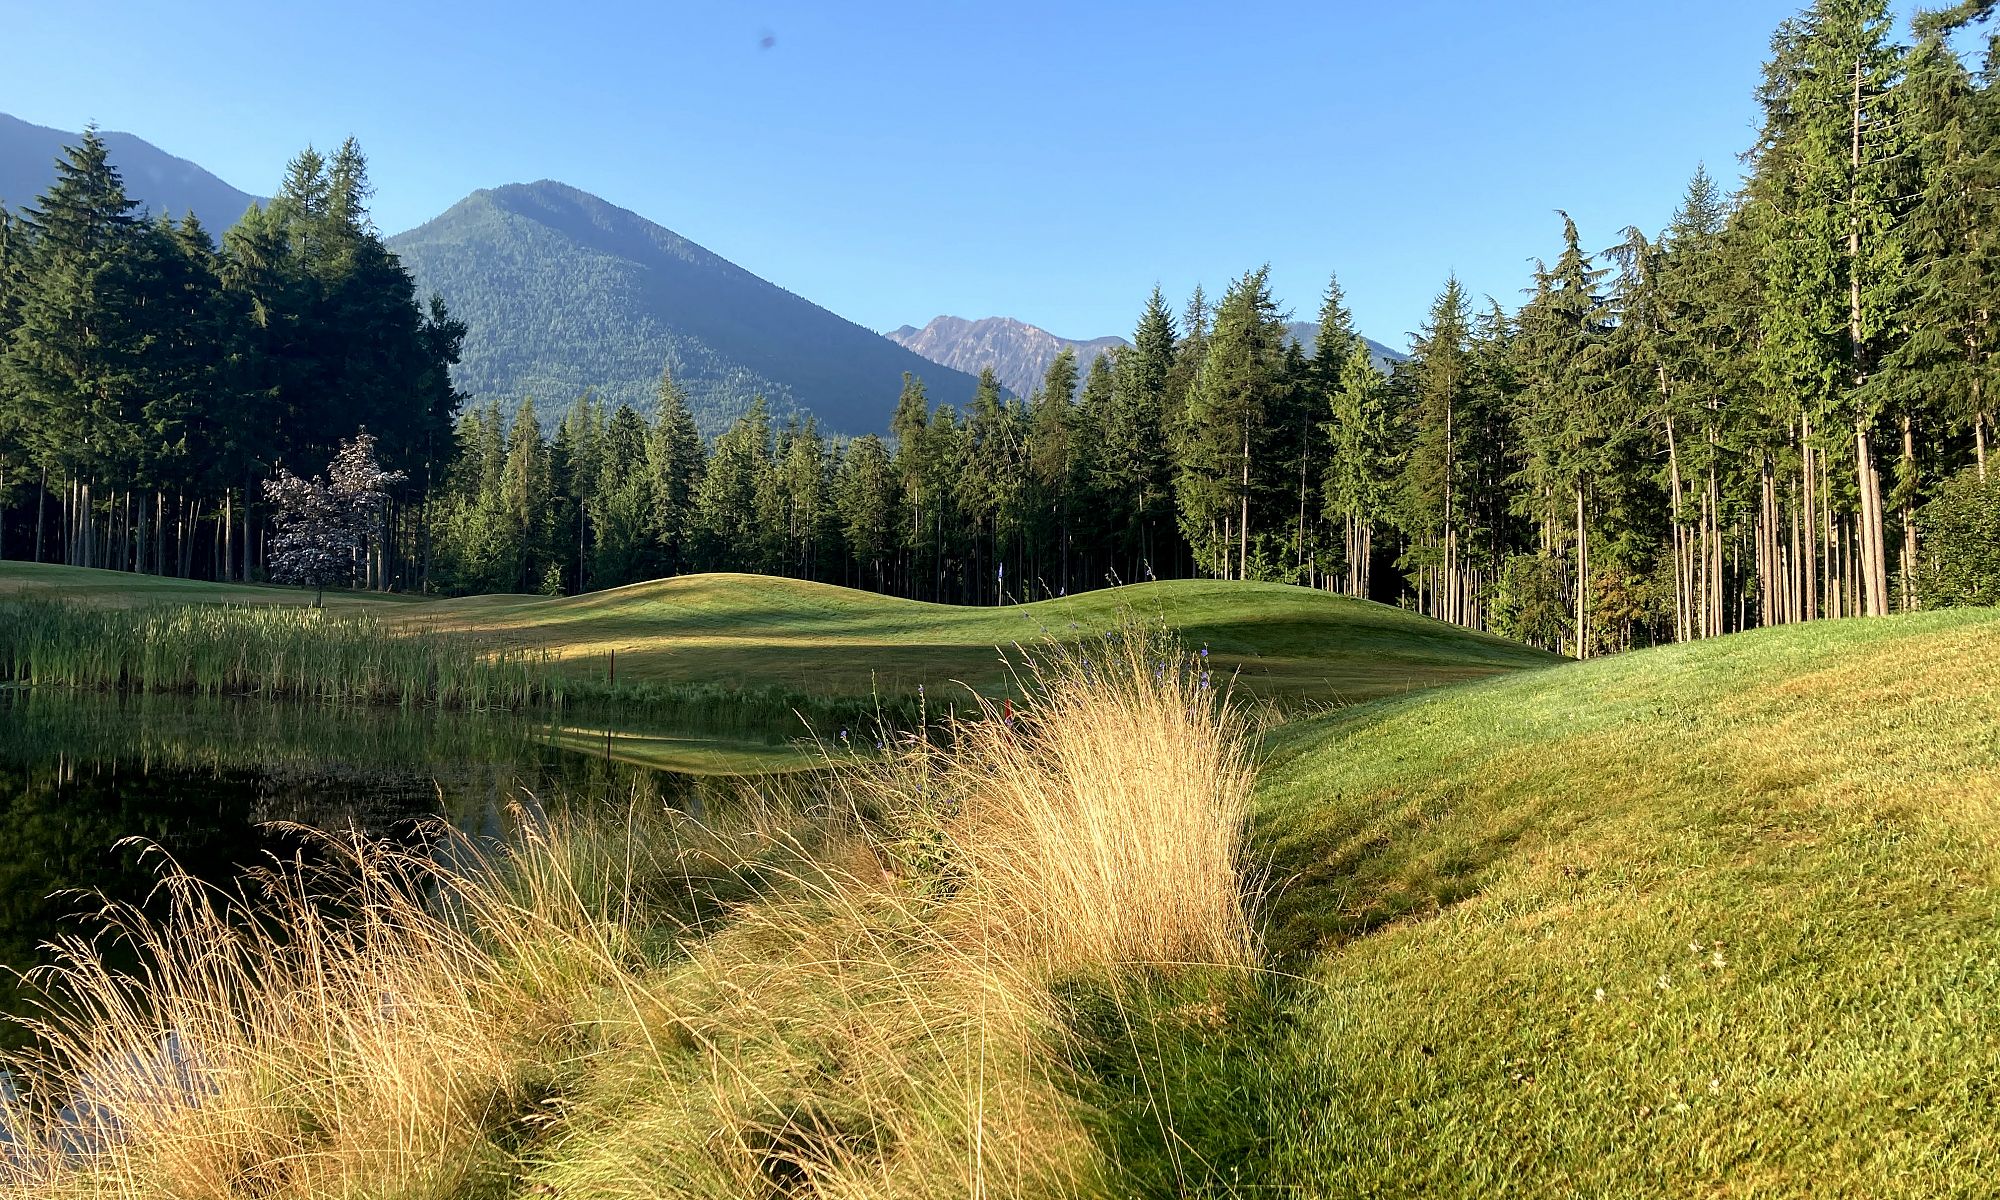 The Clear Choice for Golf in the West Kootenay Region